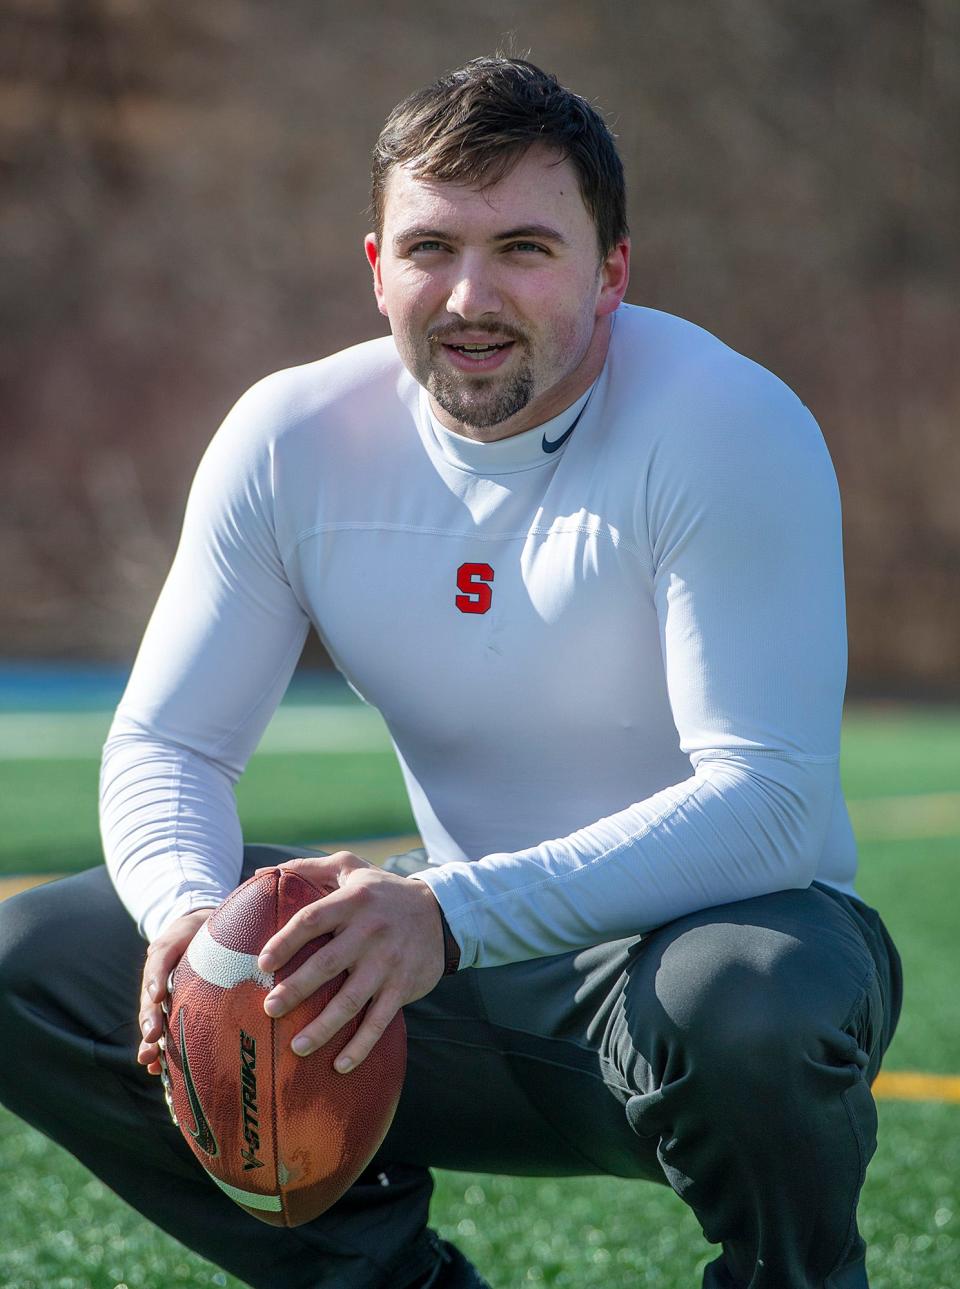 Otto Zaccardo, a 2015 Lincoln-Sudbury Regional High School graduate who played football at Syracuse University, traveled to Houston to try out for the United States Football league (USFL) this past weekend. On Feb. 14, 2023, Zaccardo worked out on the Sudbury school field.